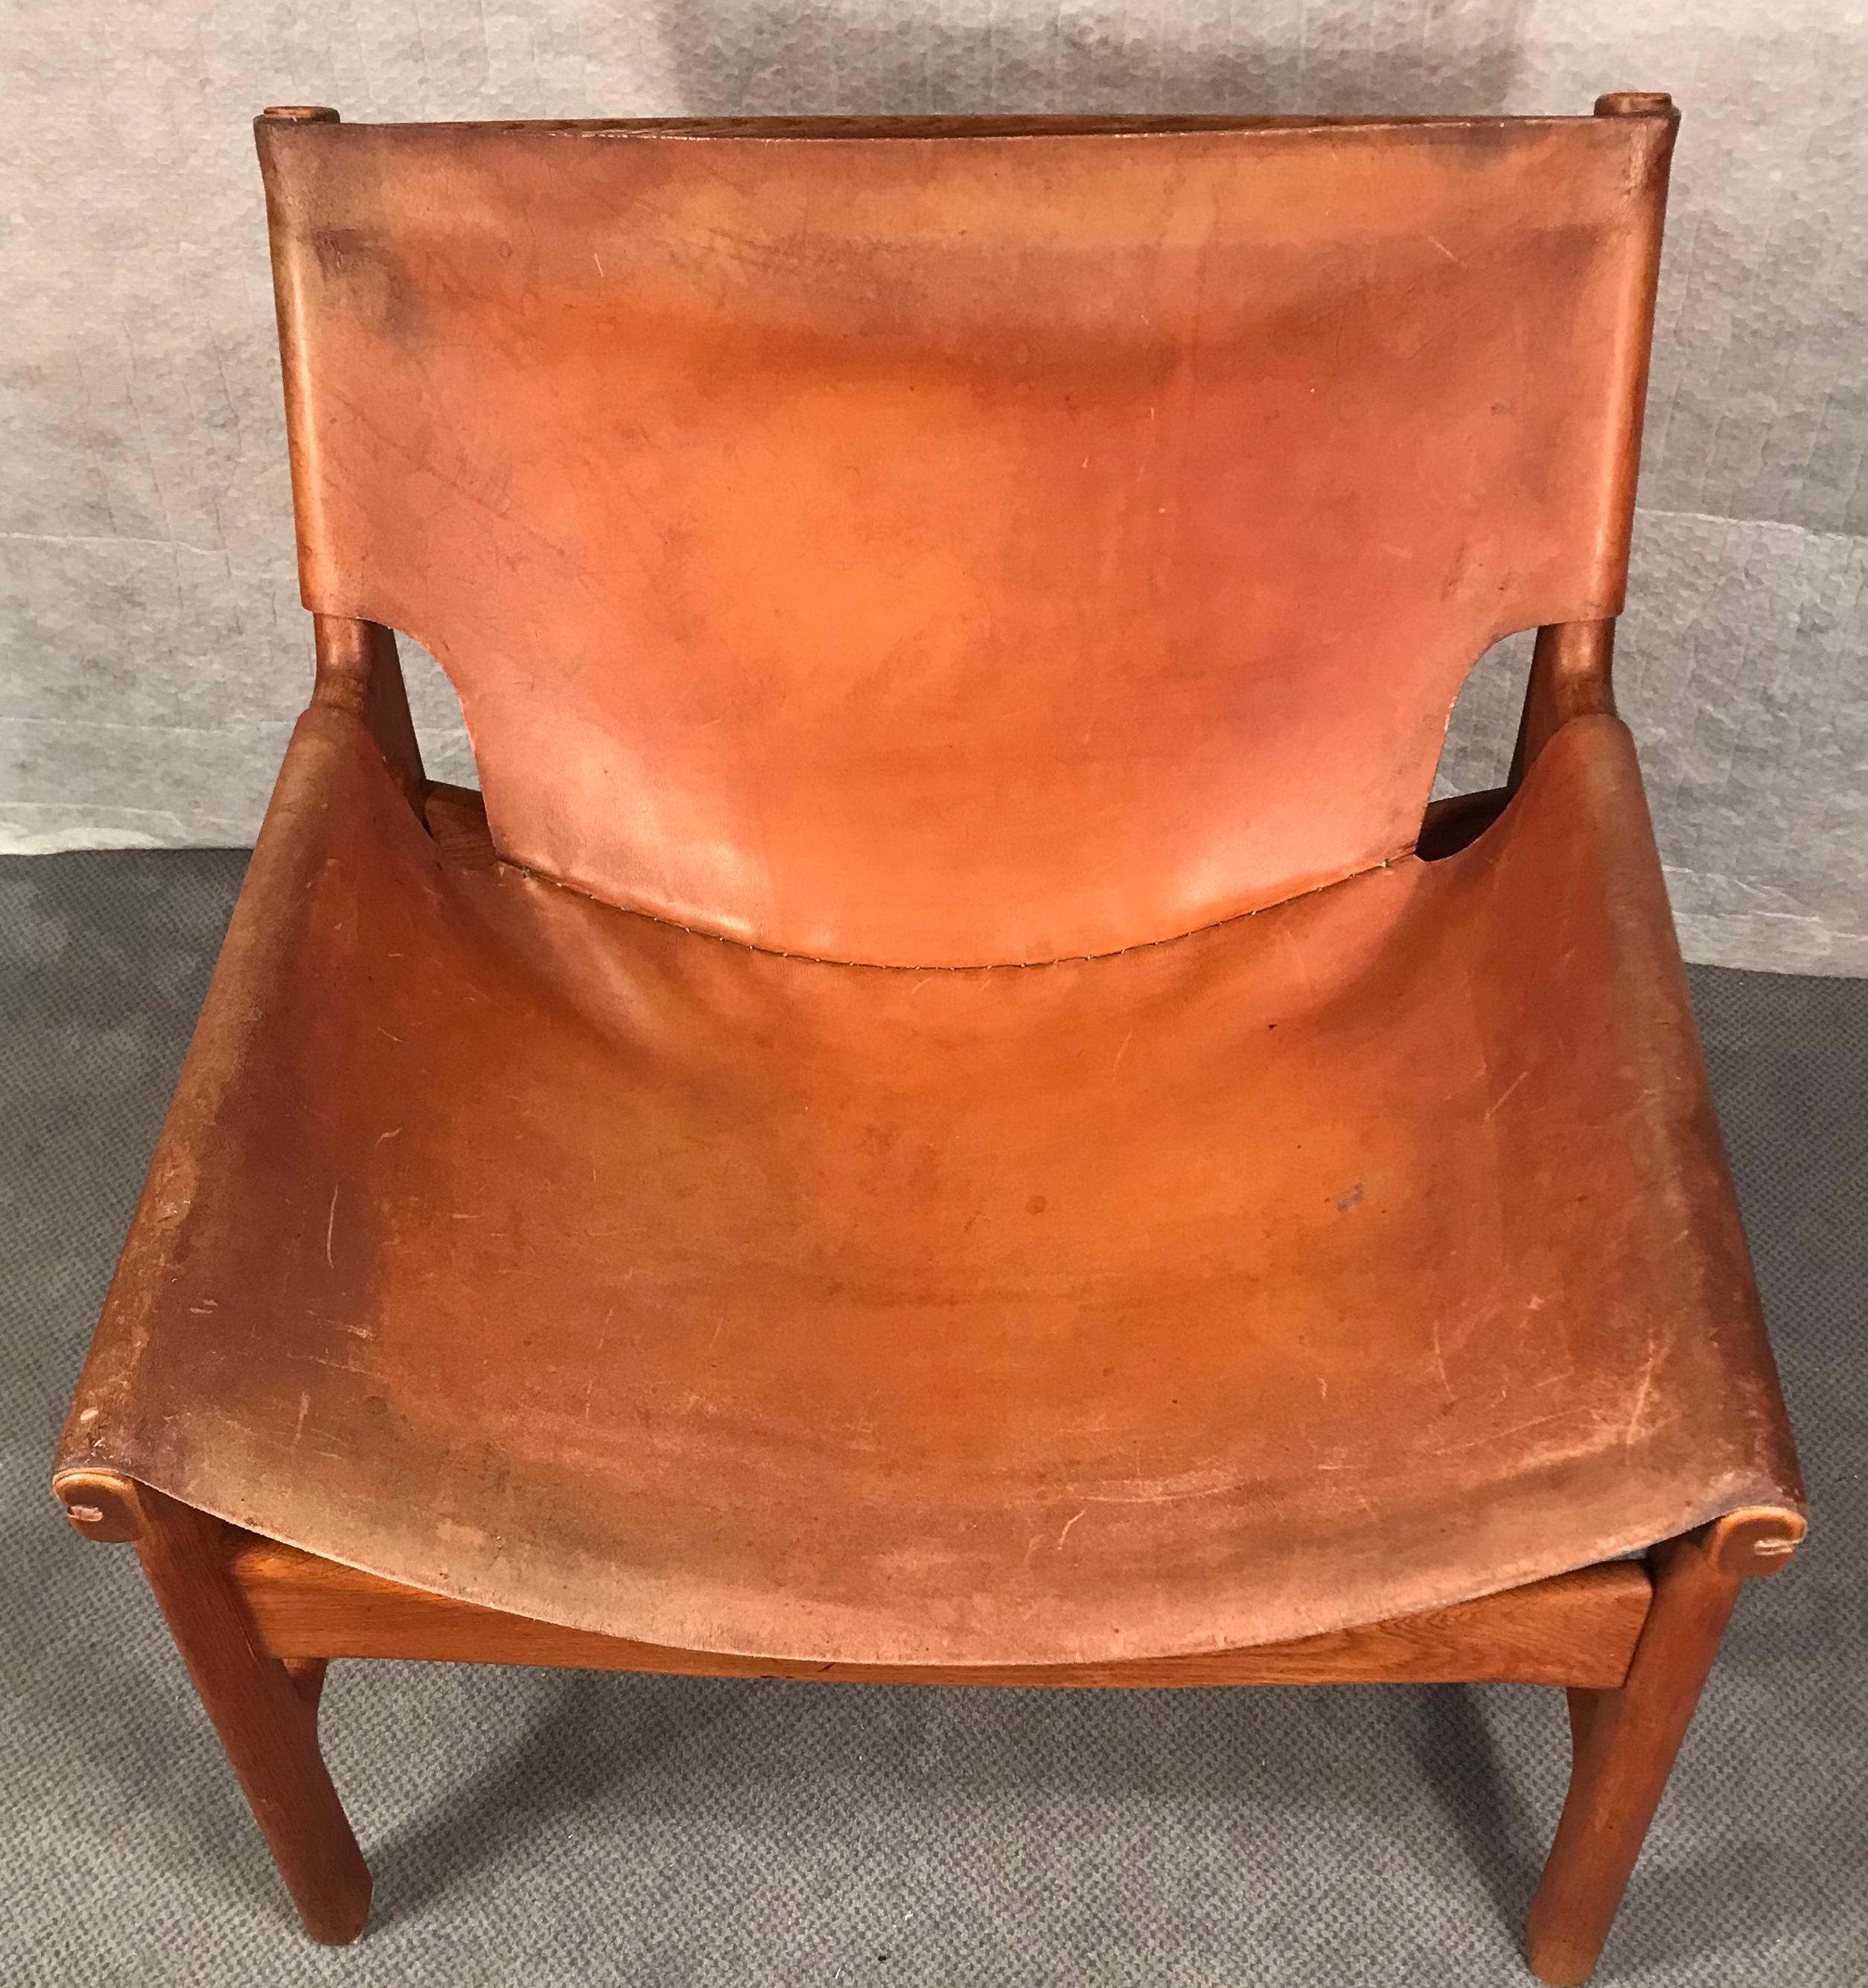 Danish Midcentury Leather Swing Chair by Illum Wikkelso, Denmark, 1950s For Sale